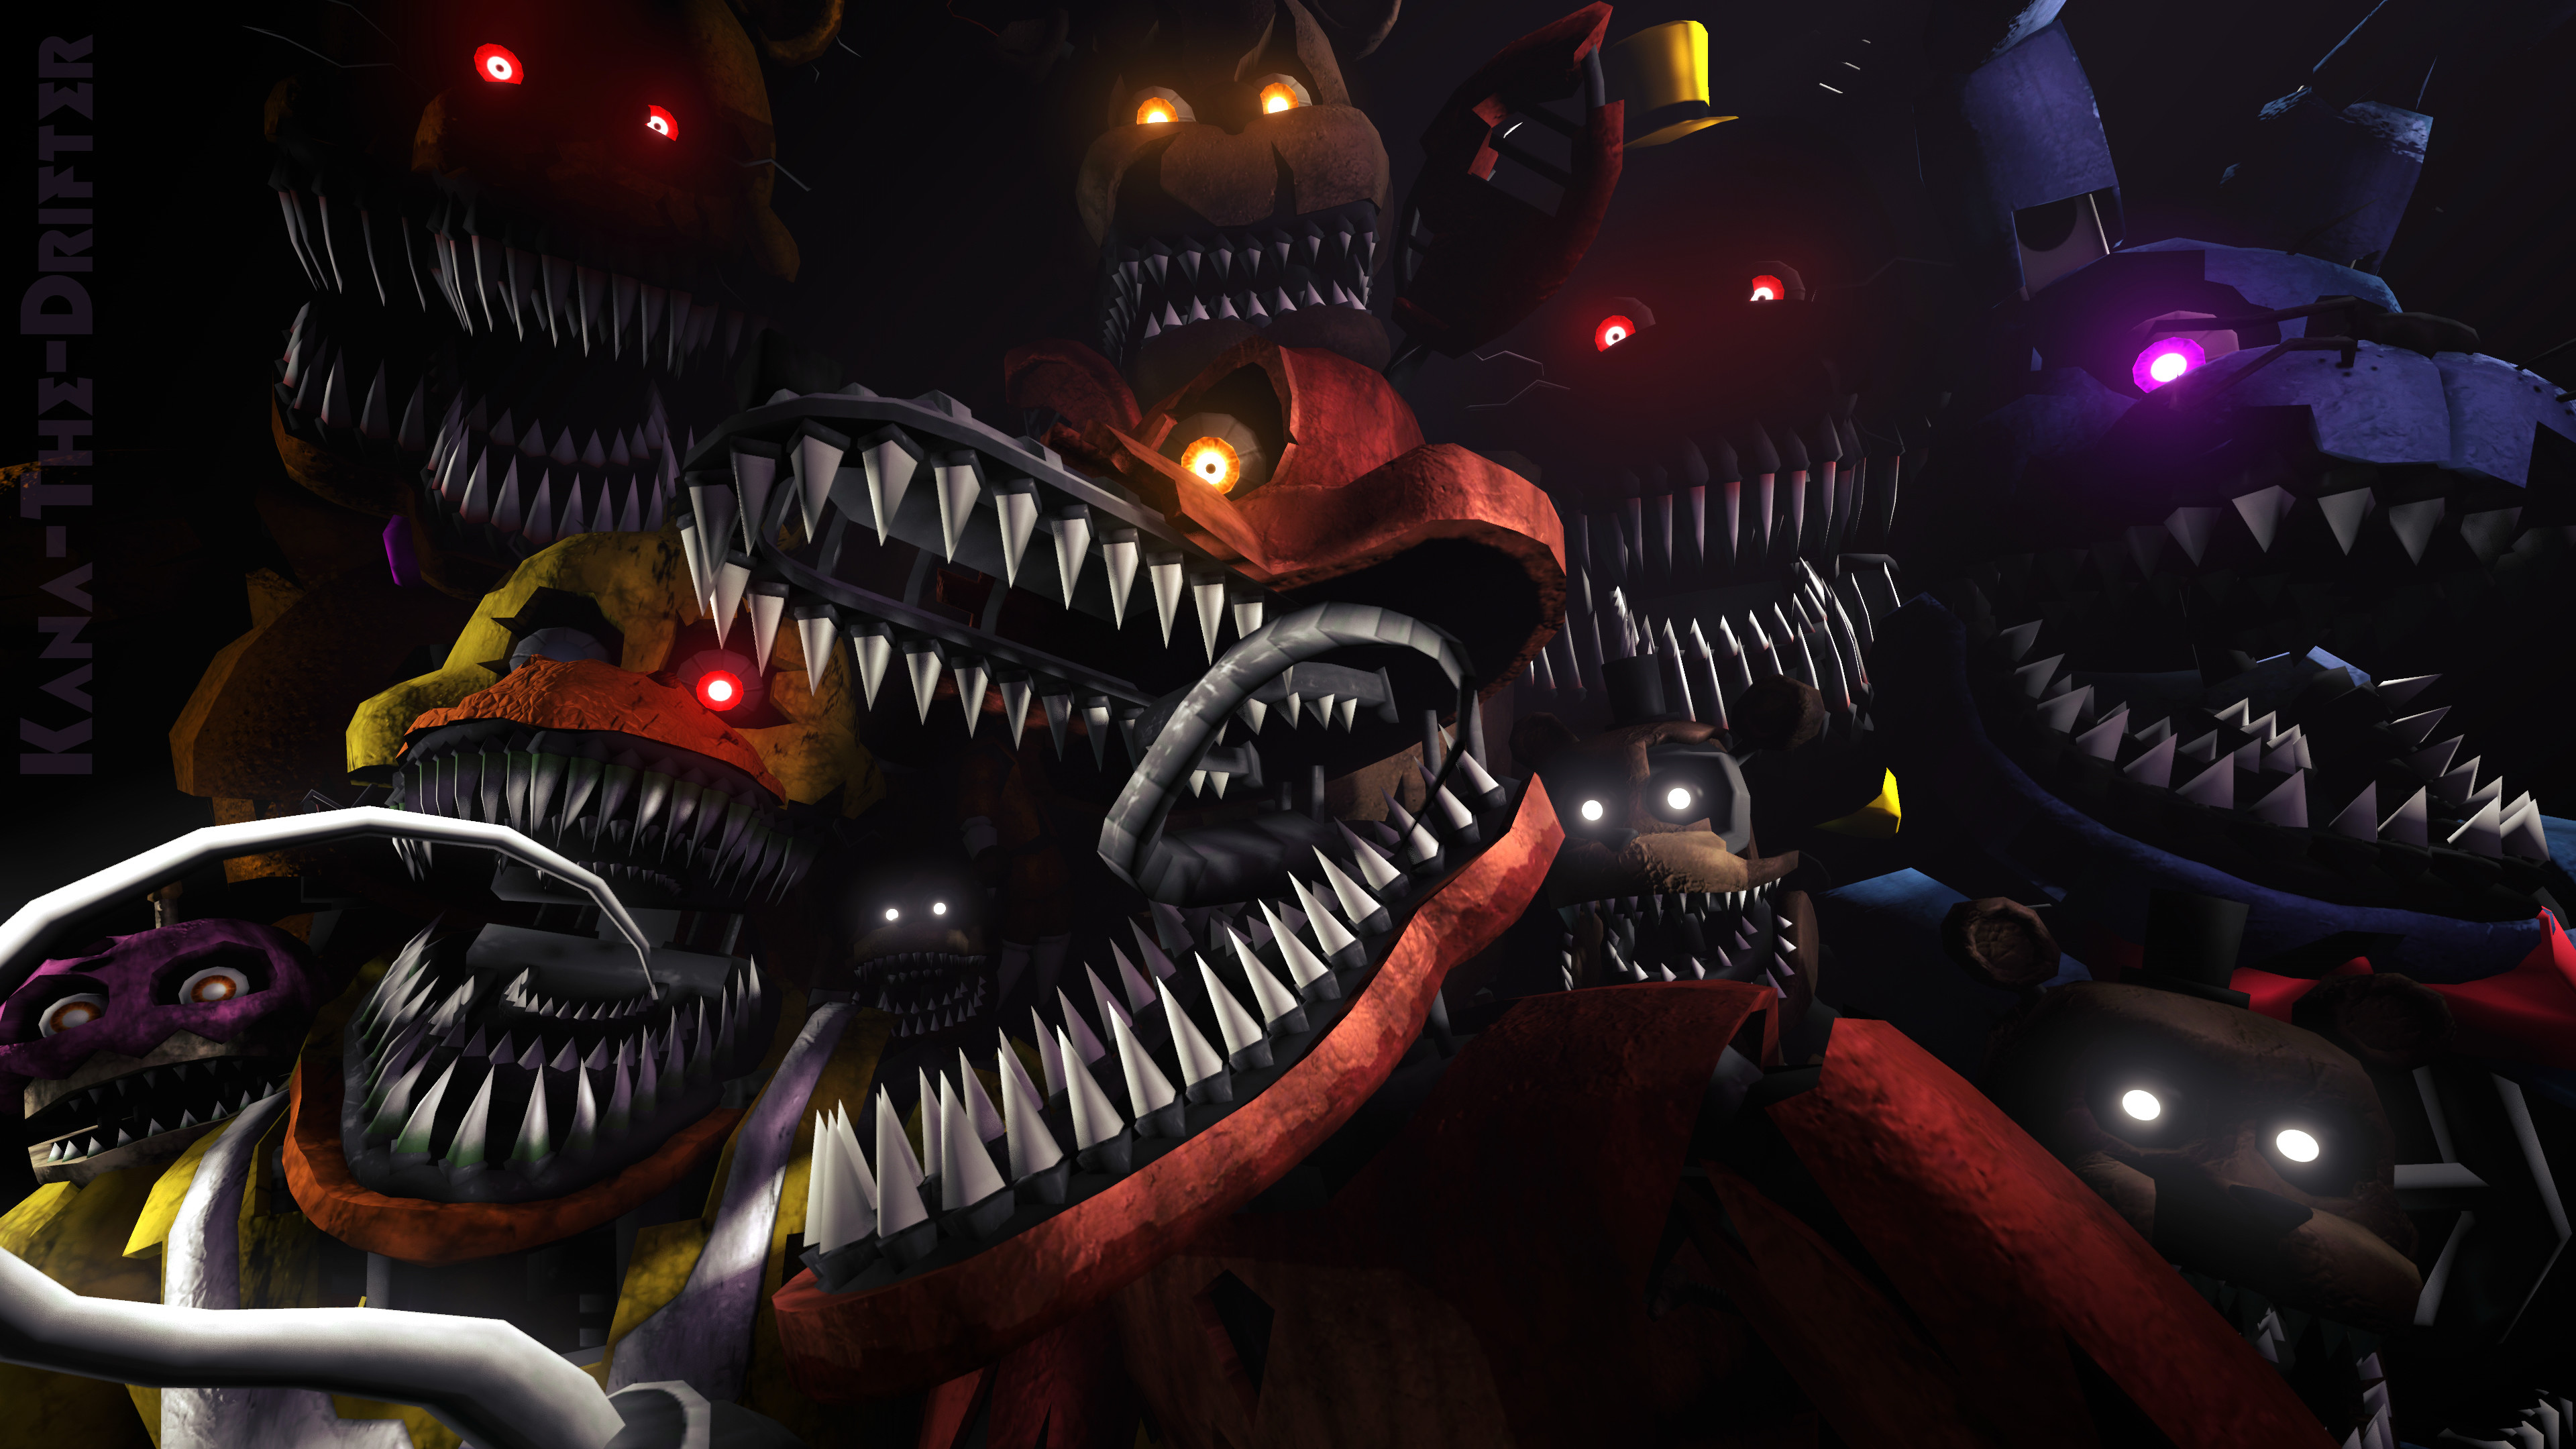 … We'll Stay Here Forever (FNAF SFM Wallpaper) by Kana-The-